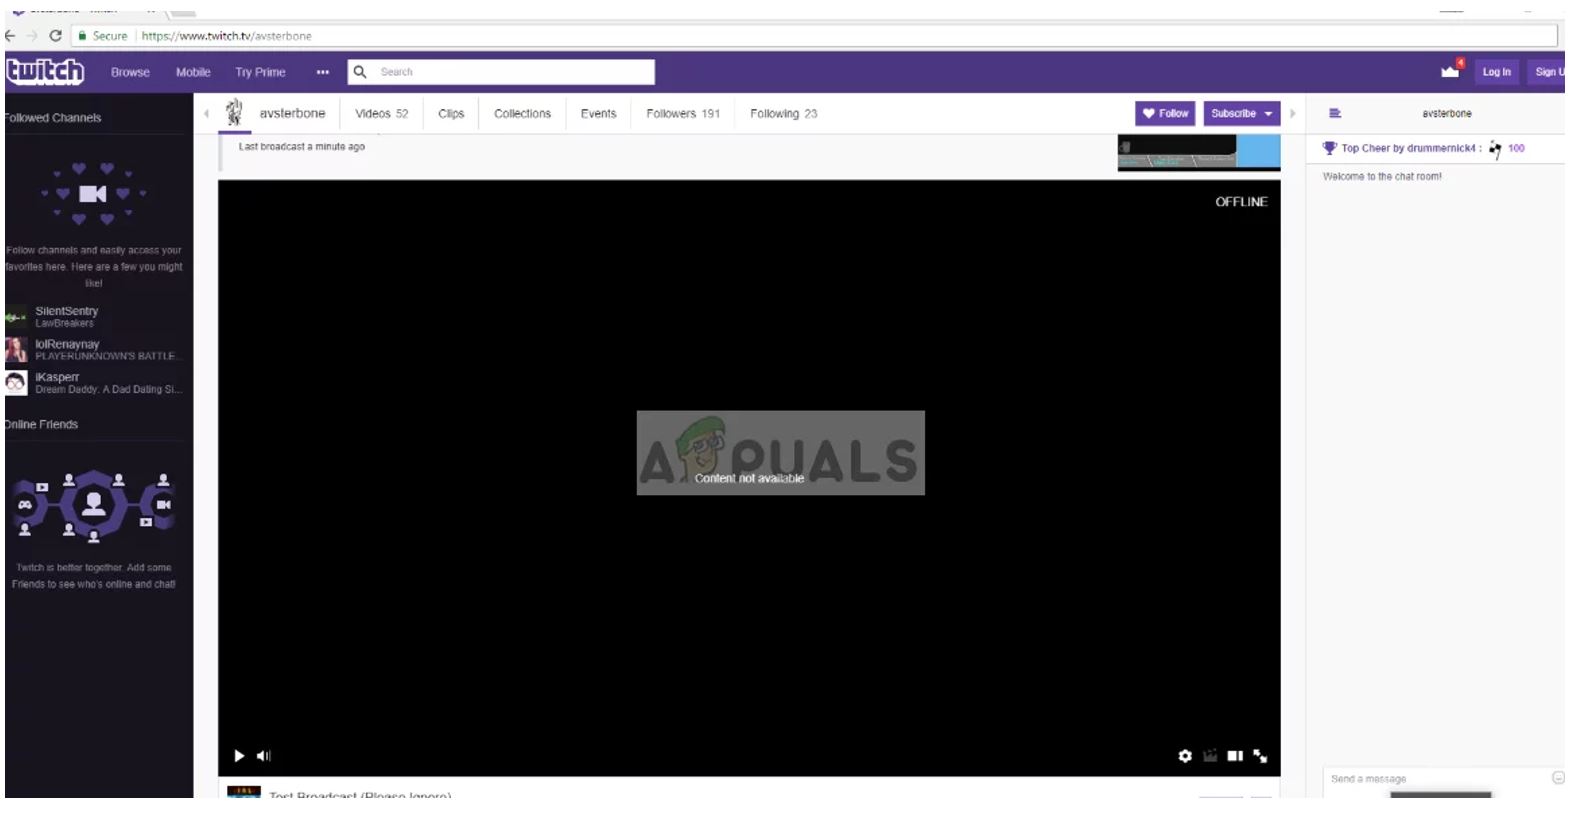 Why are my Twitch streams not loading (black screen)